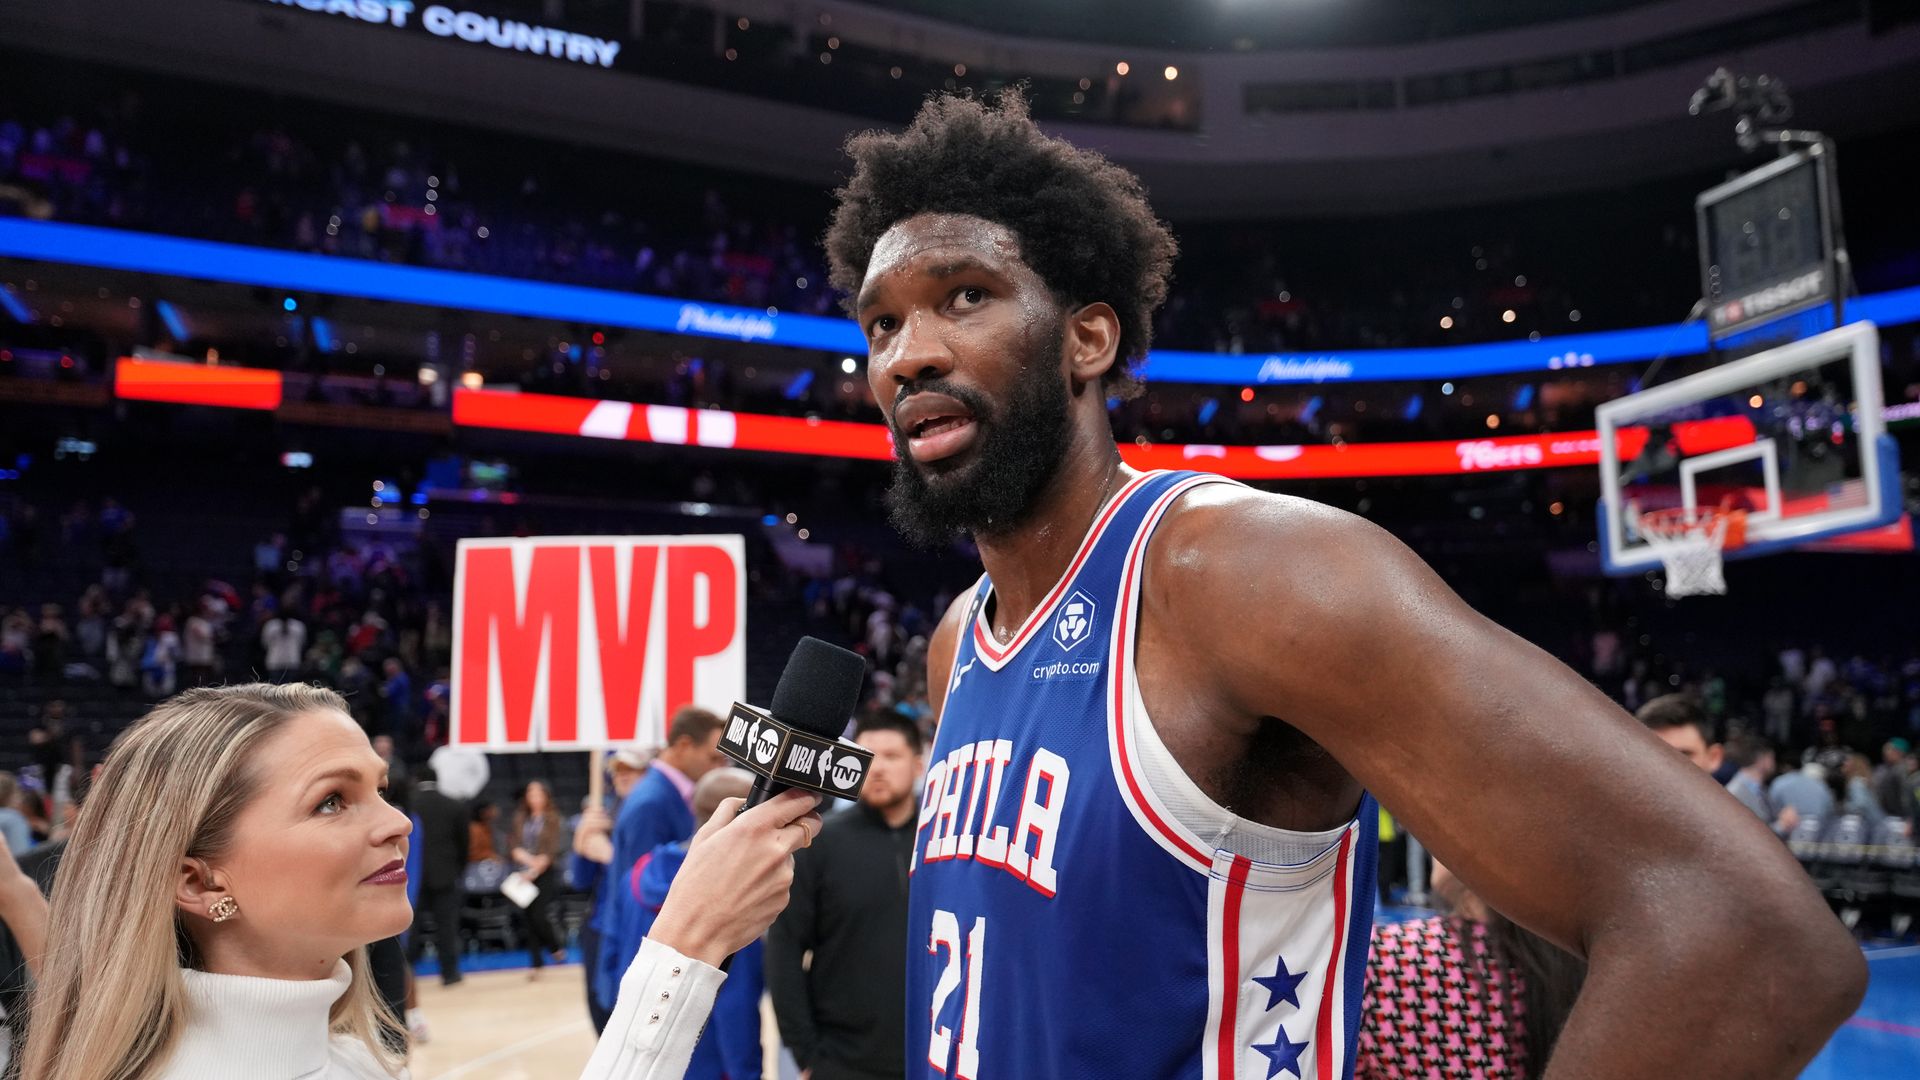 Sixers center Joel Embiid being interviewed courtside by a reporter.